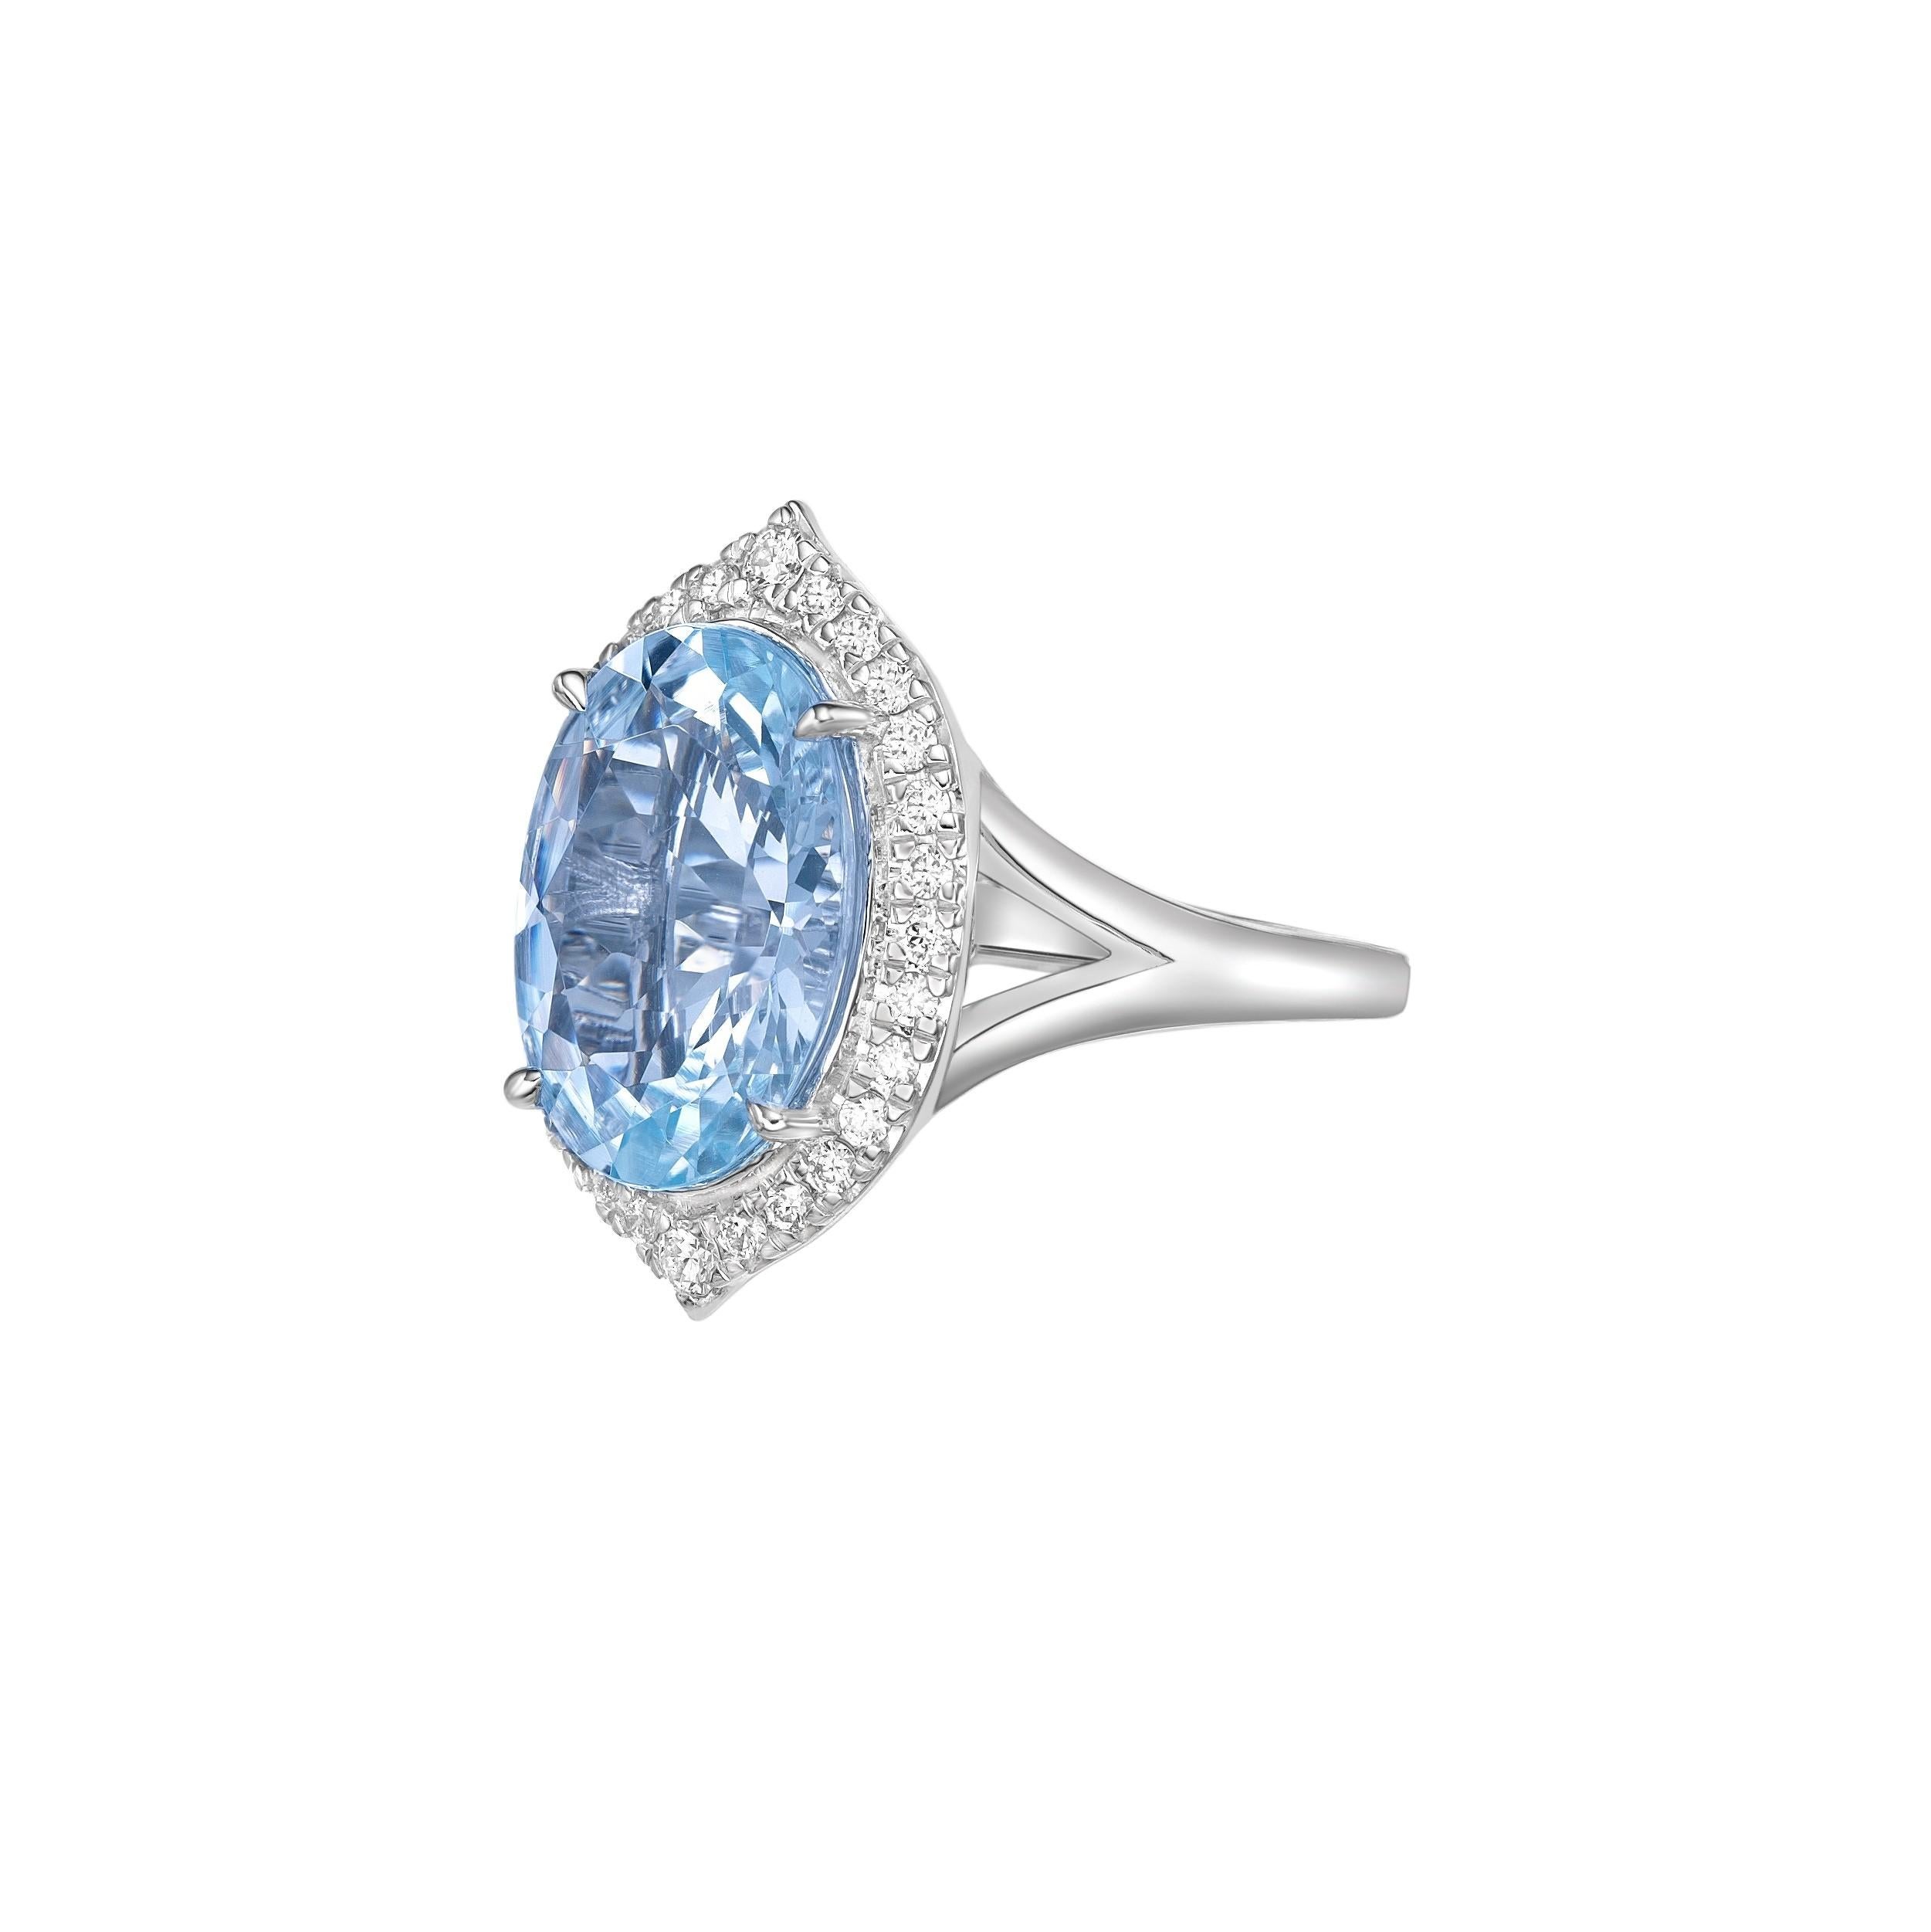 Oval Cut 6.07Carat Aquamarine Fancy Ring in 18Karat White Gold with White Diamond. For Sale